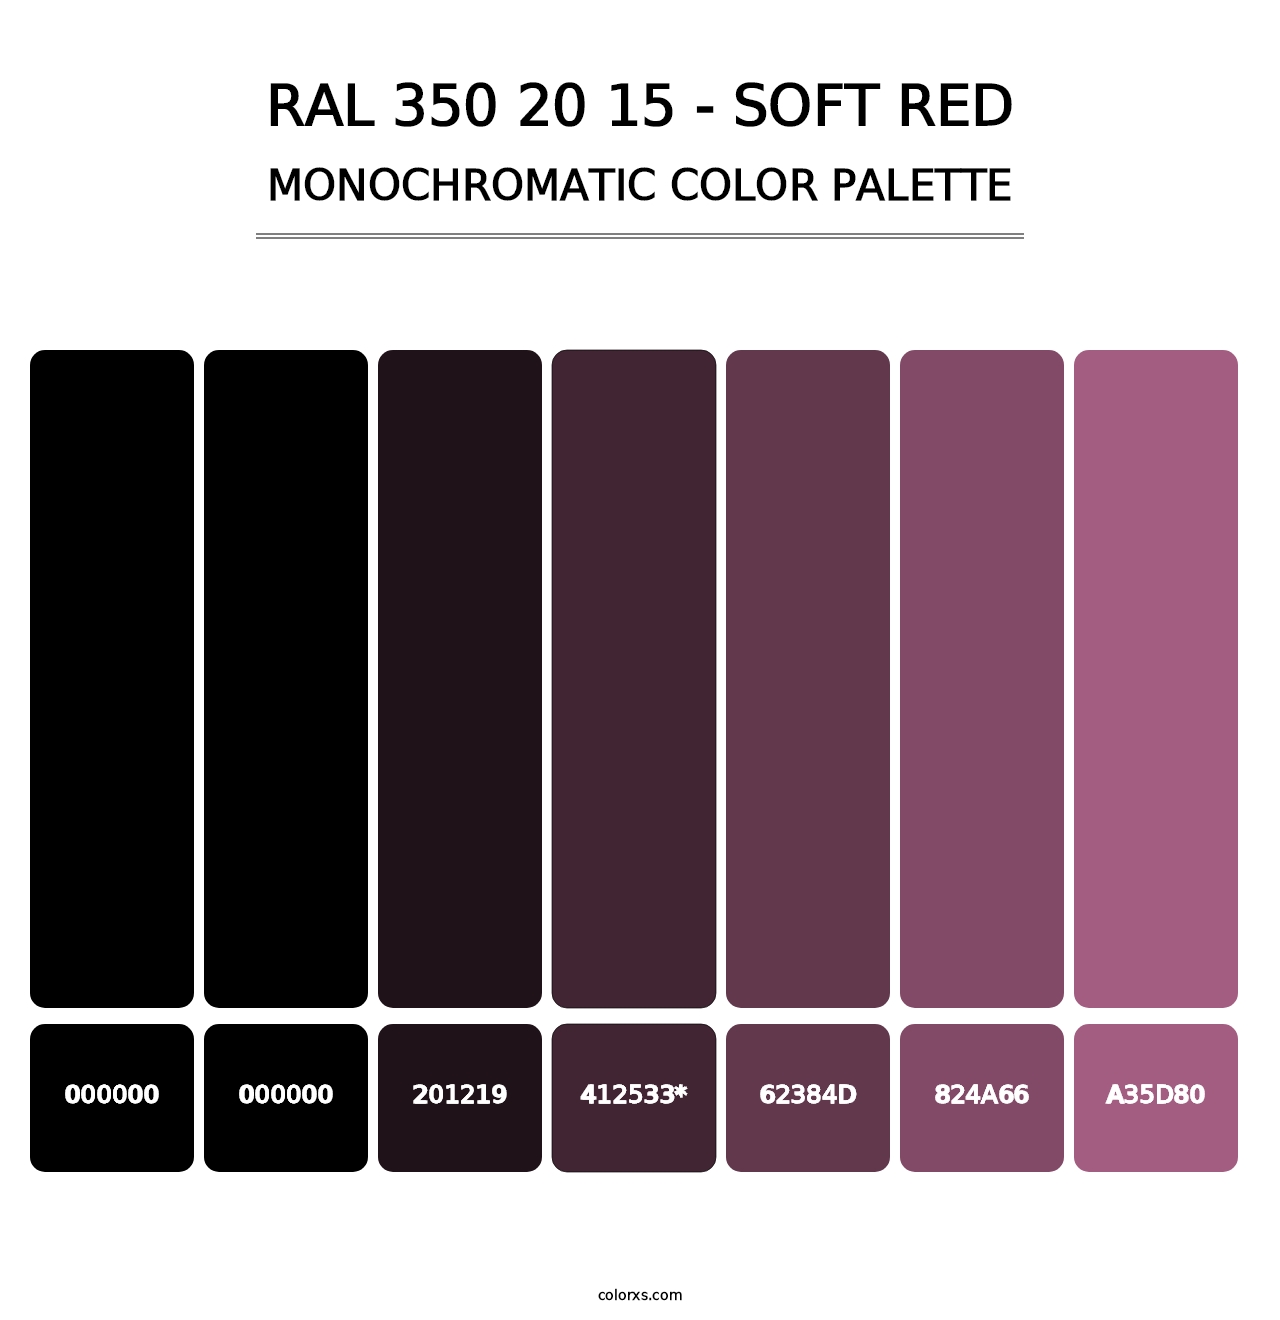 RAL 350 20 15 - Soft Red - Monochromatic Color Palette